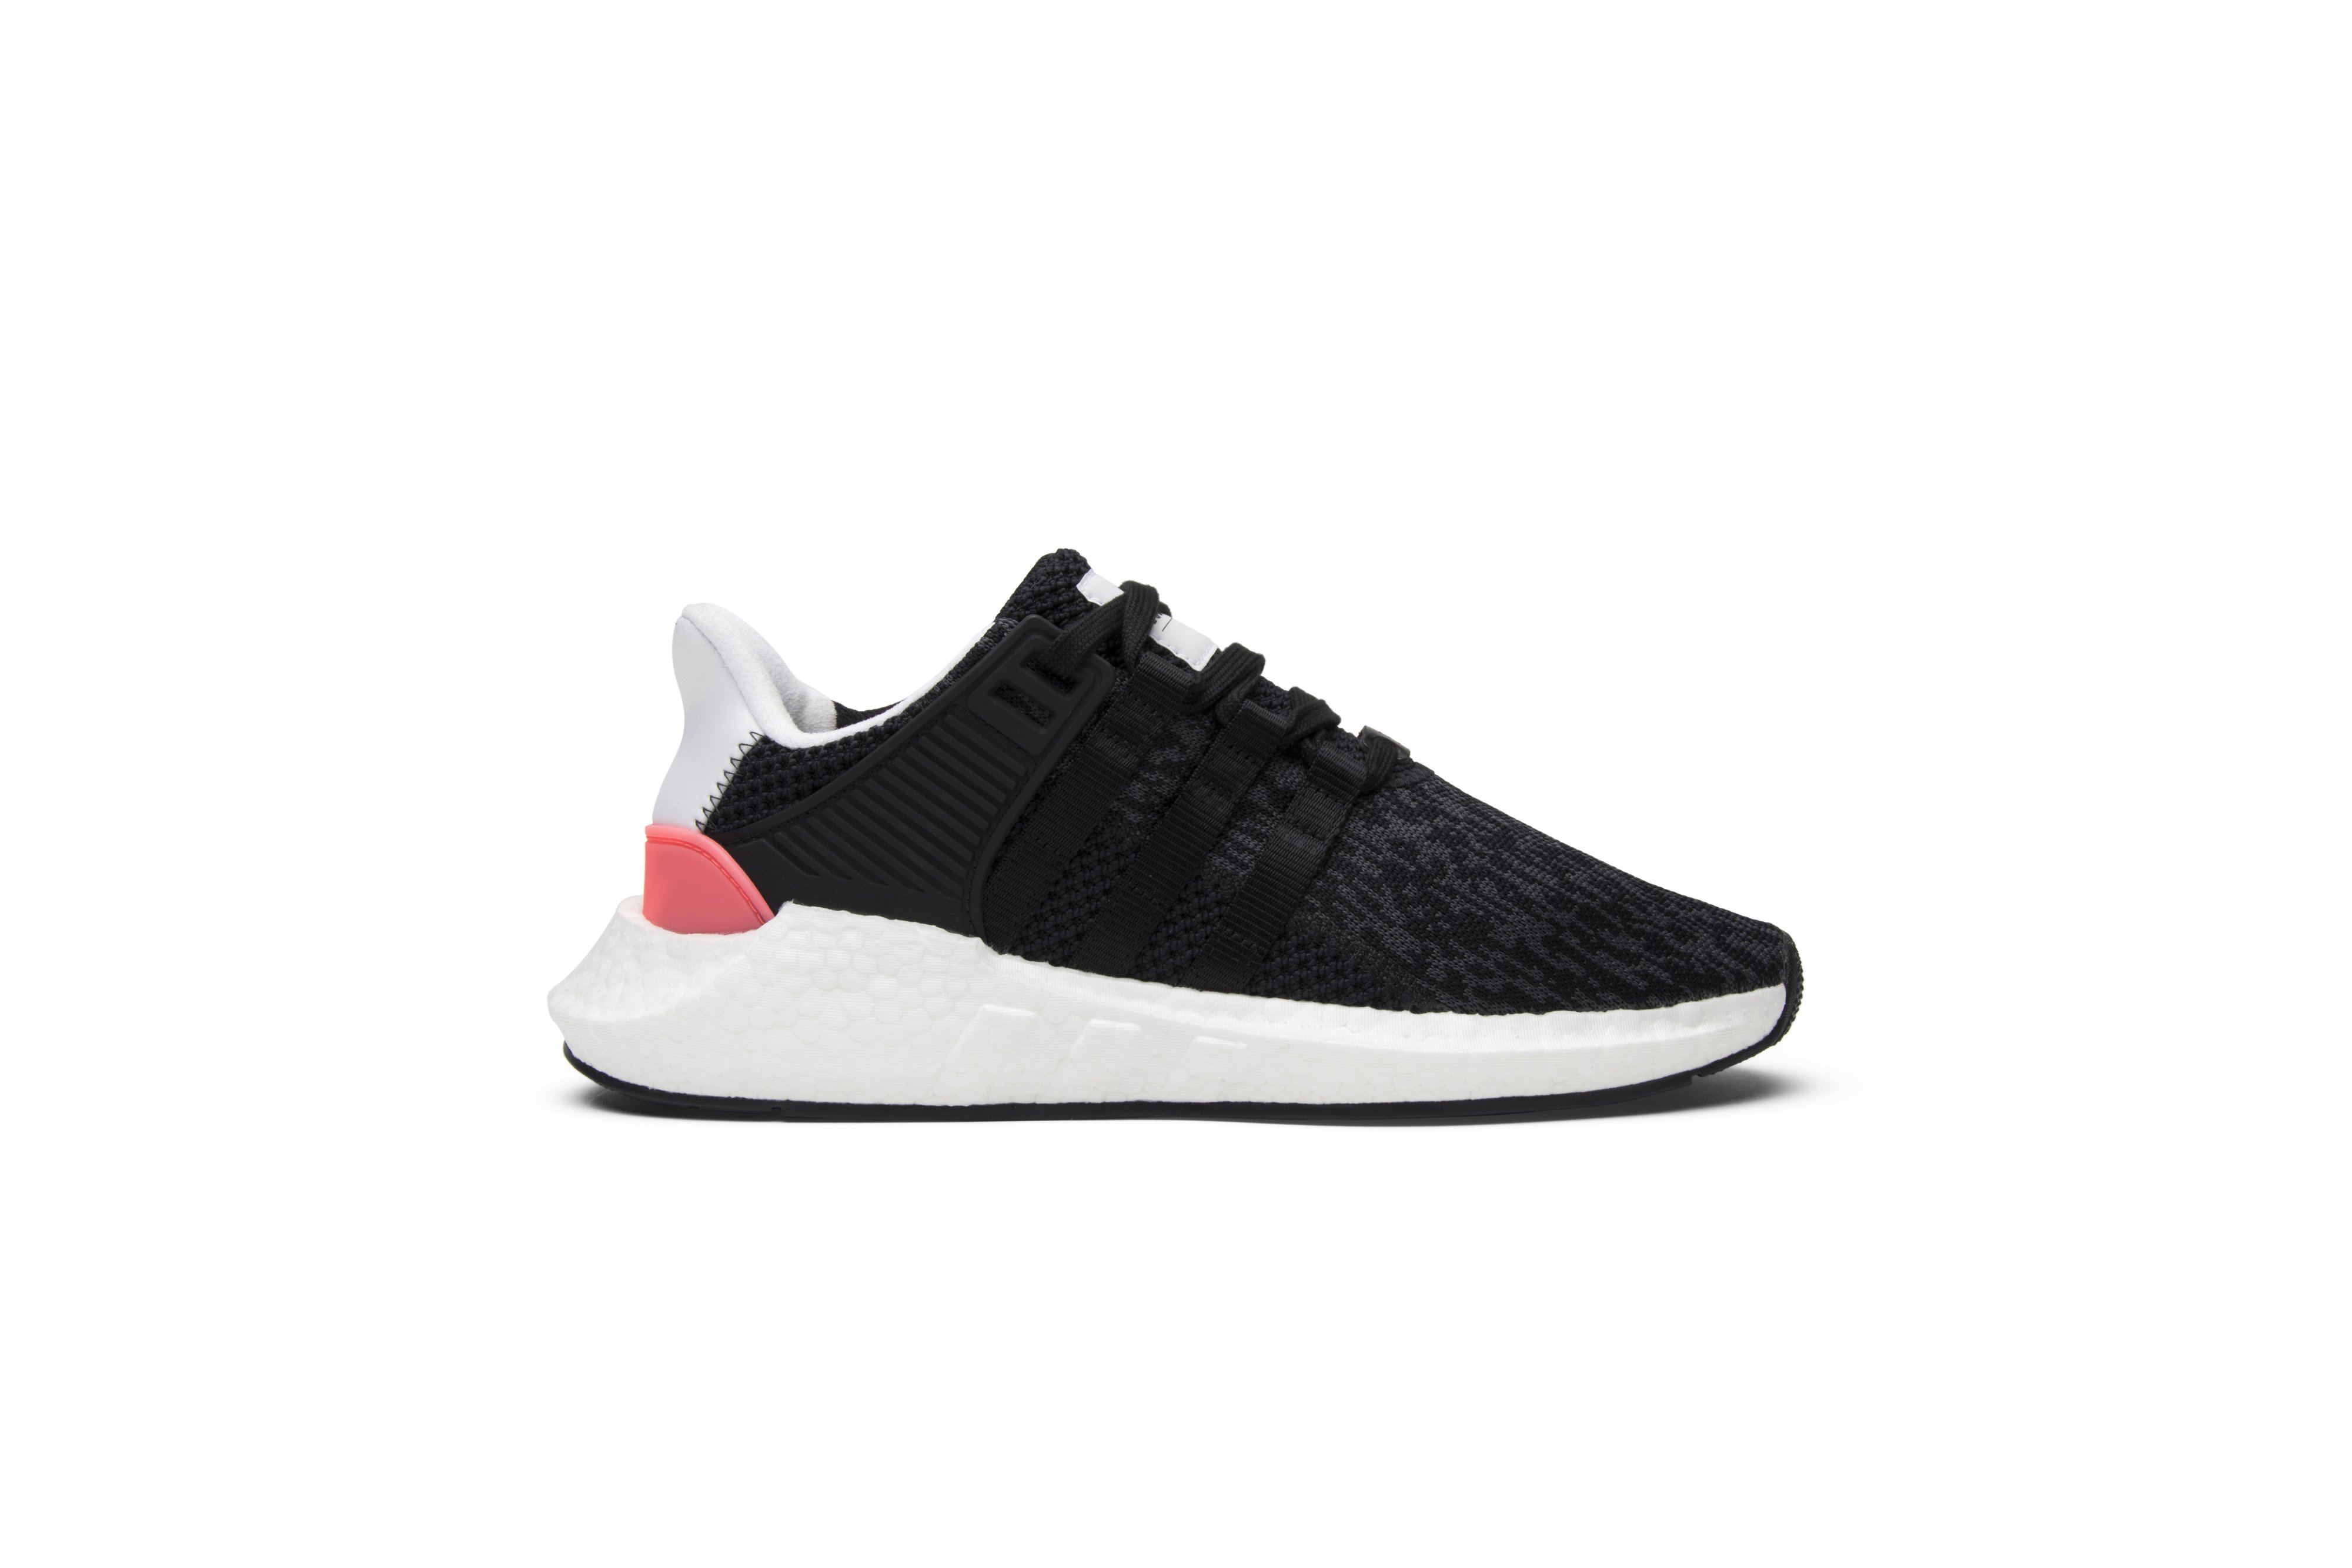 Buy EQT Support 93/17 'Core Black Turbo Red' - BB1234 | GOAT